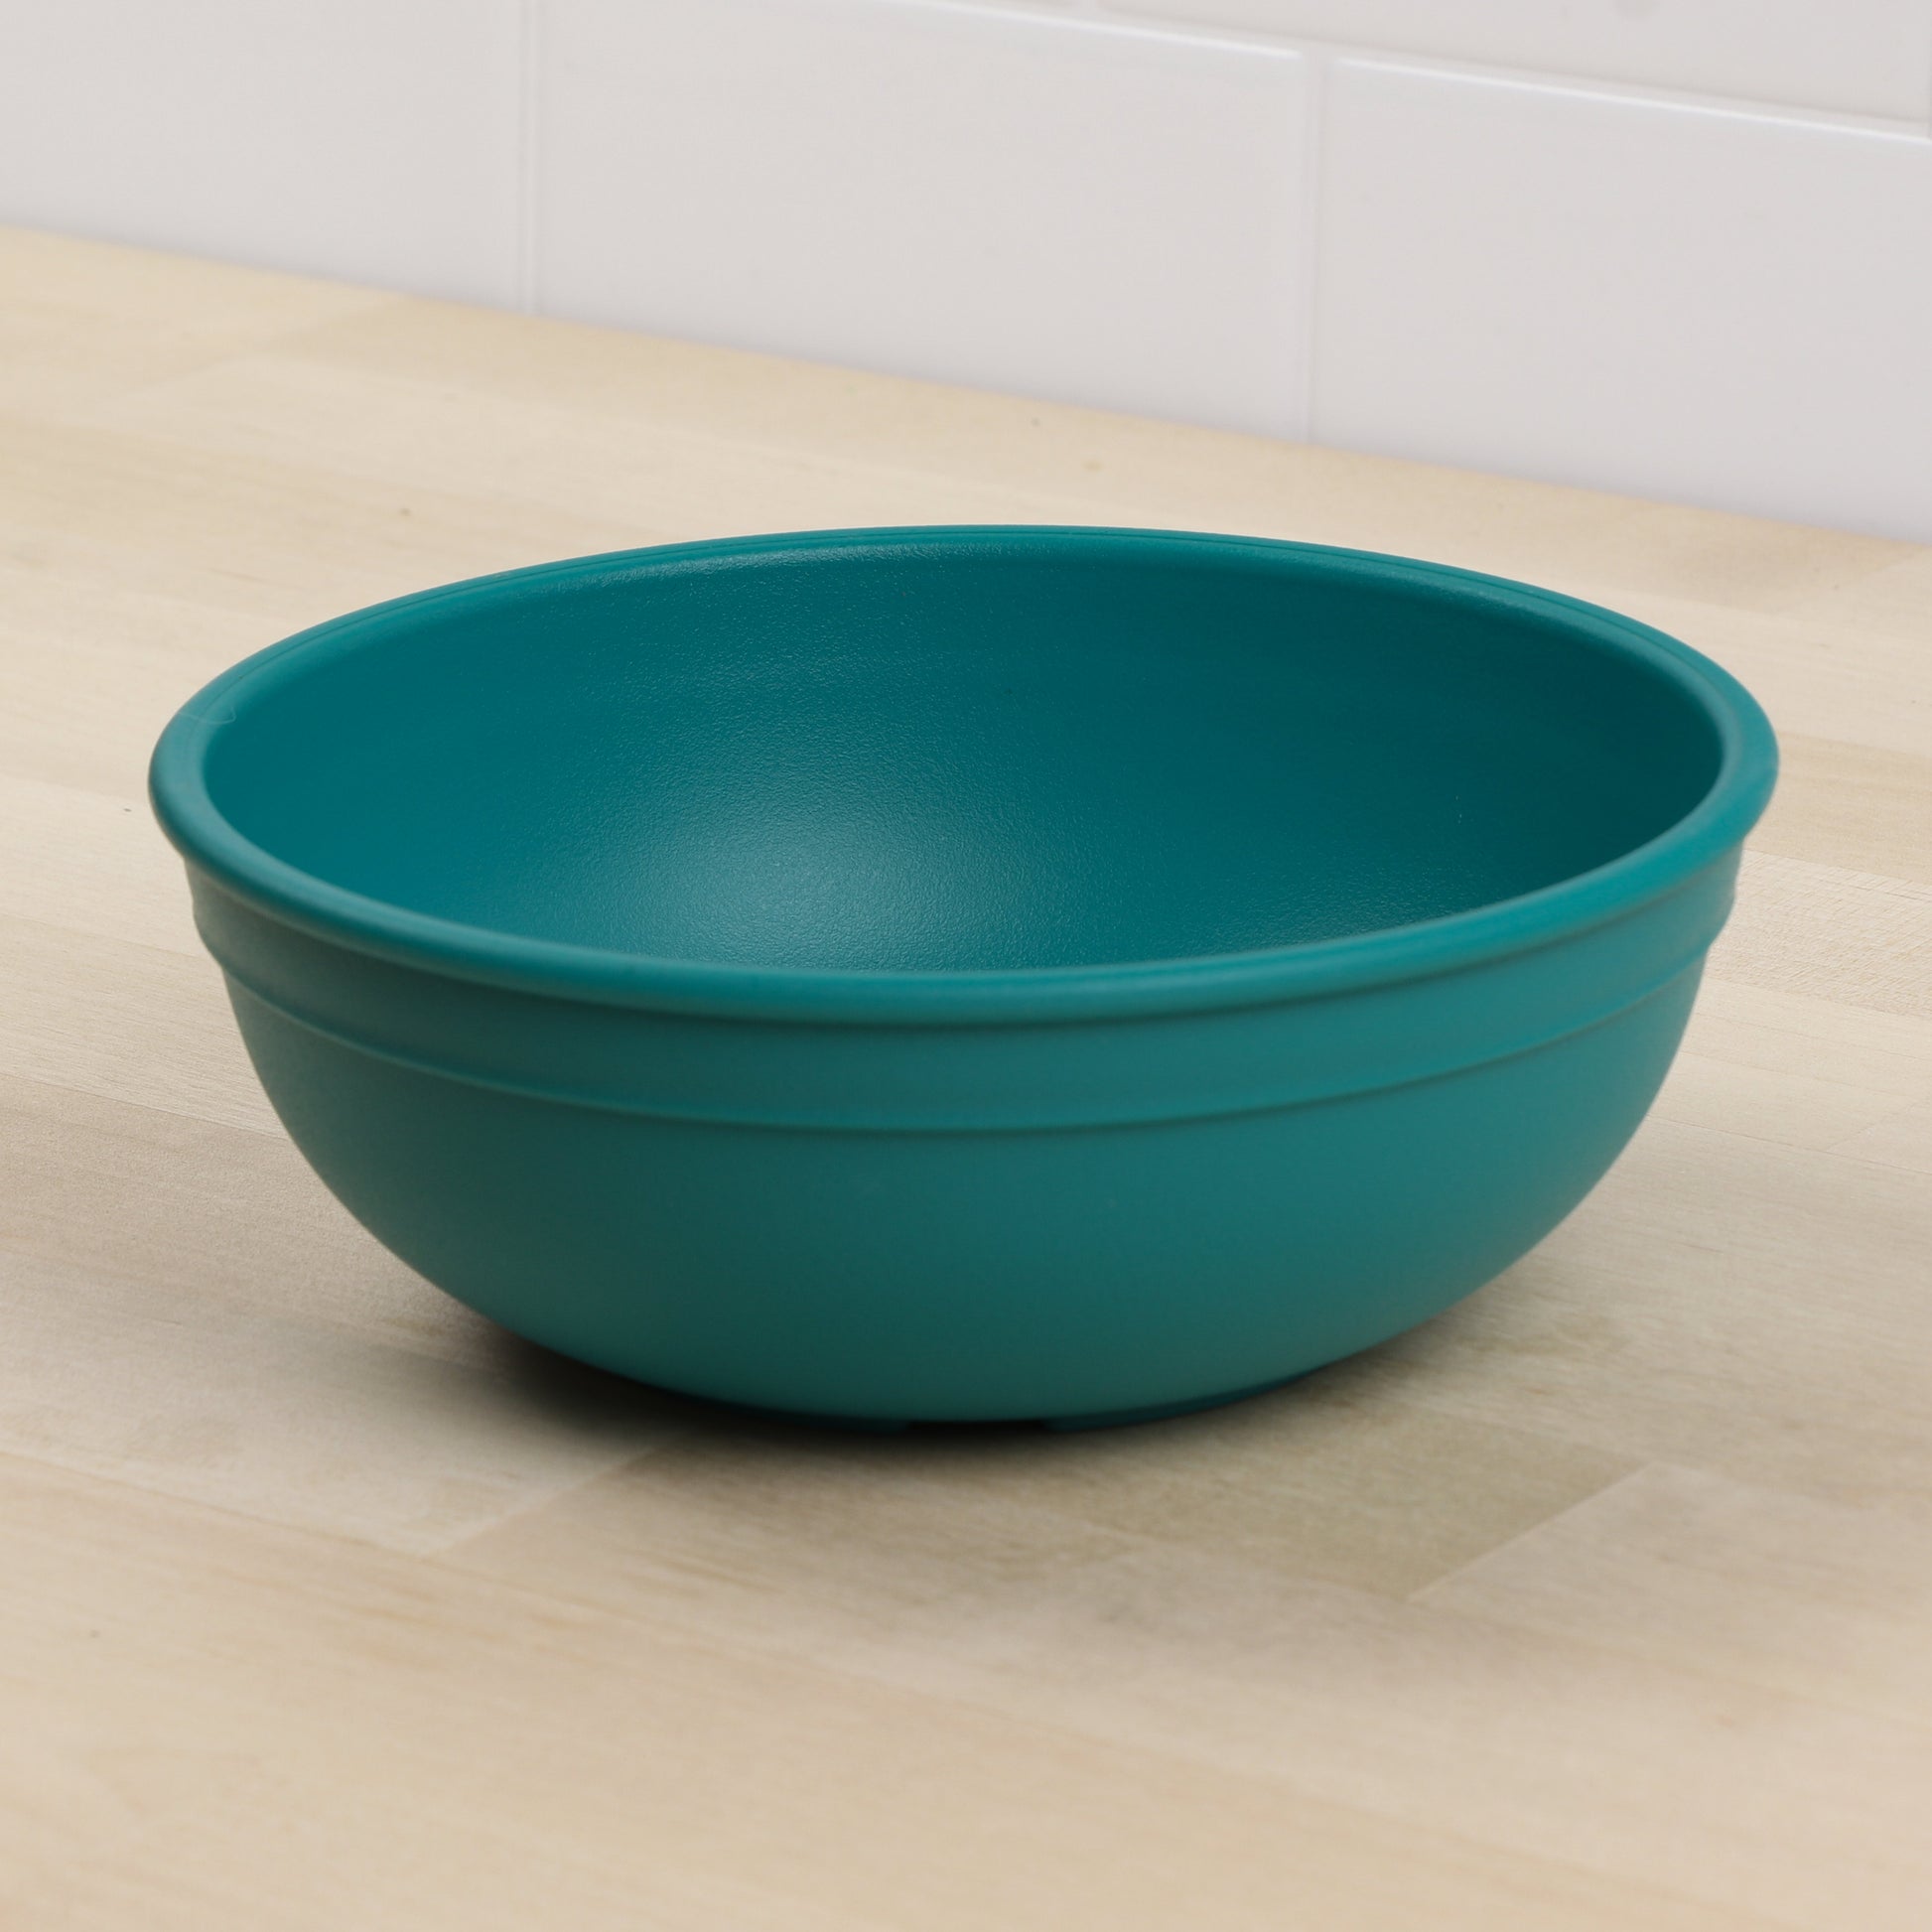 Re-Play Bowl | Teal Large Size from Bear & Moo